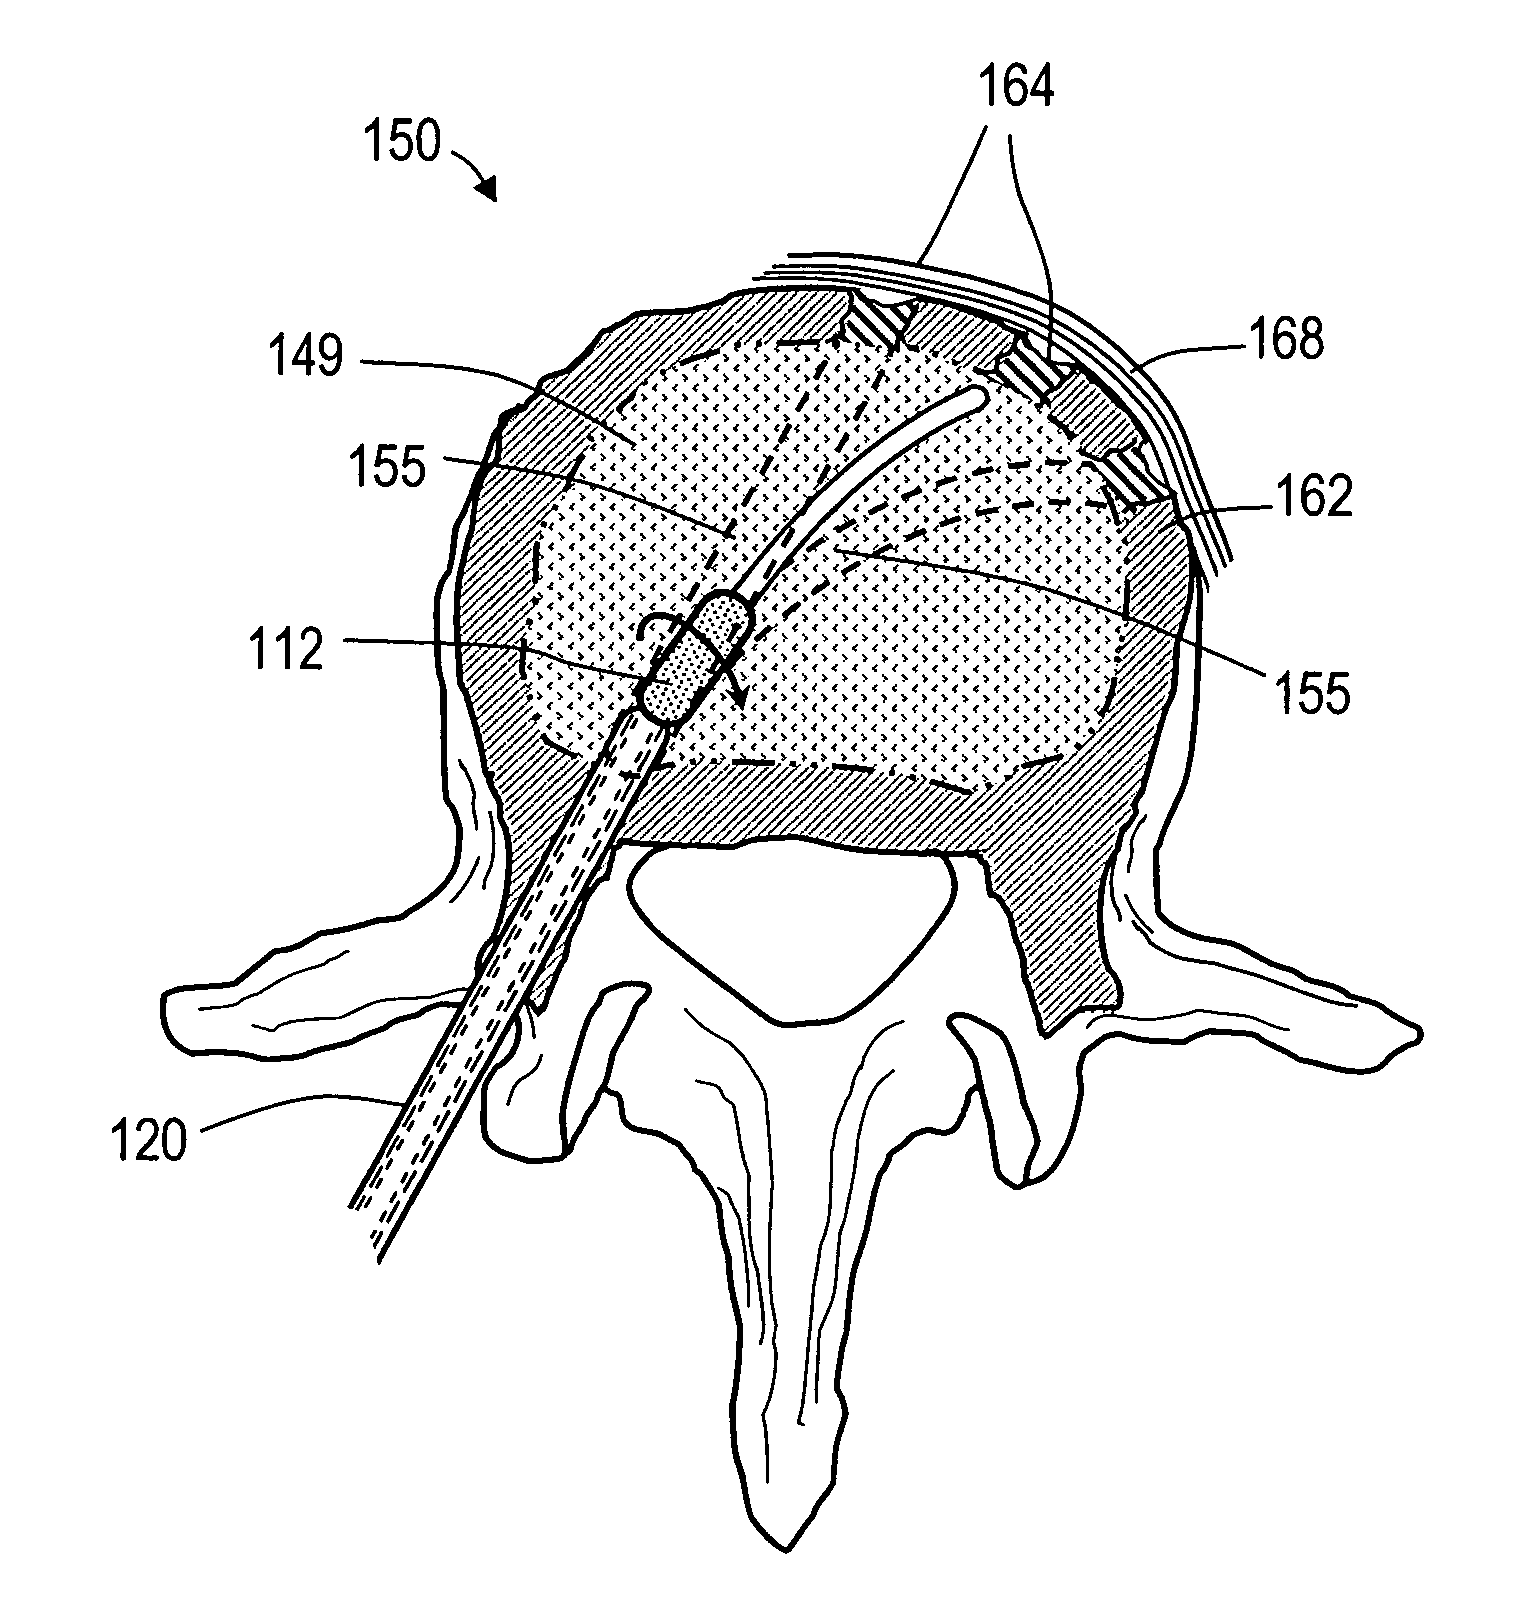 Bone treatment systems and methods for introducing an abrading structure to abrade bone